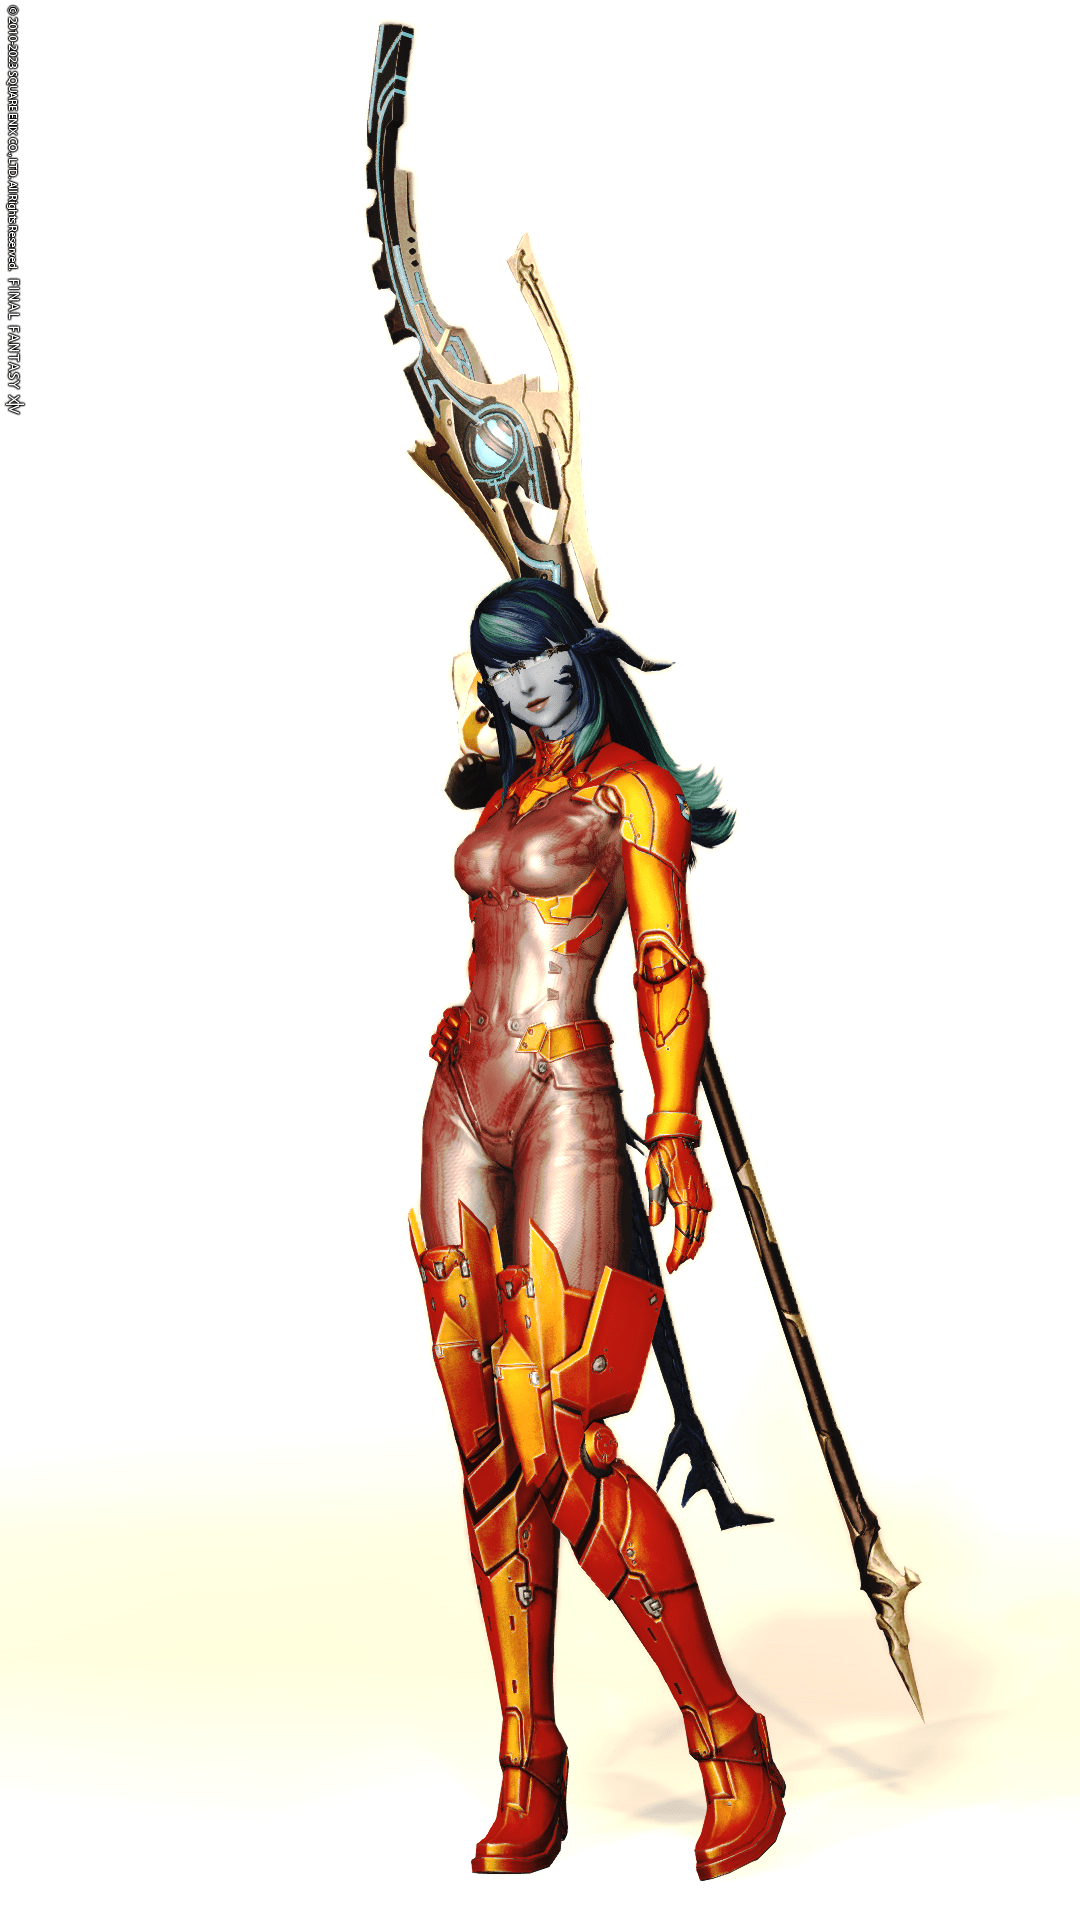 Laureine in the Late Allagan of Maiming full bodysuit without the helmet.